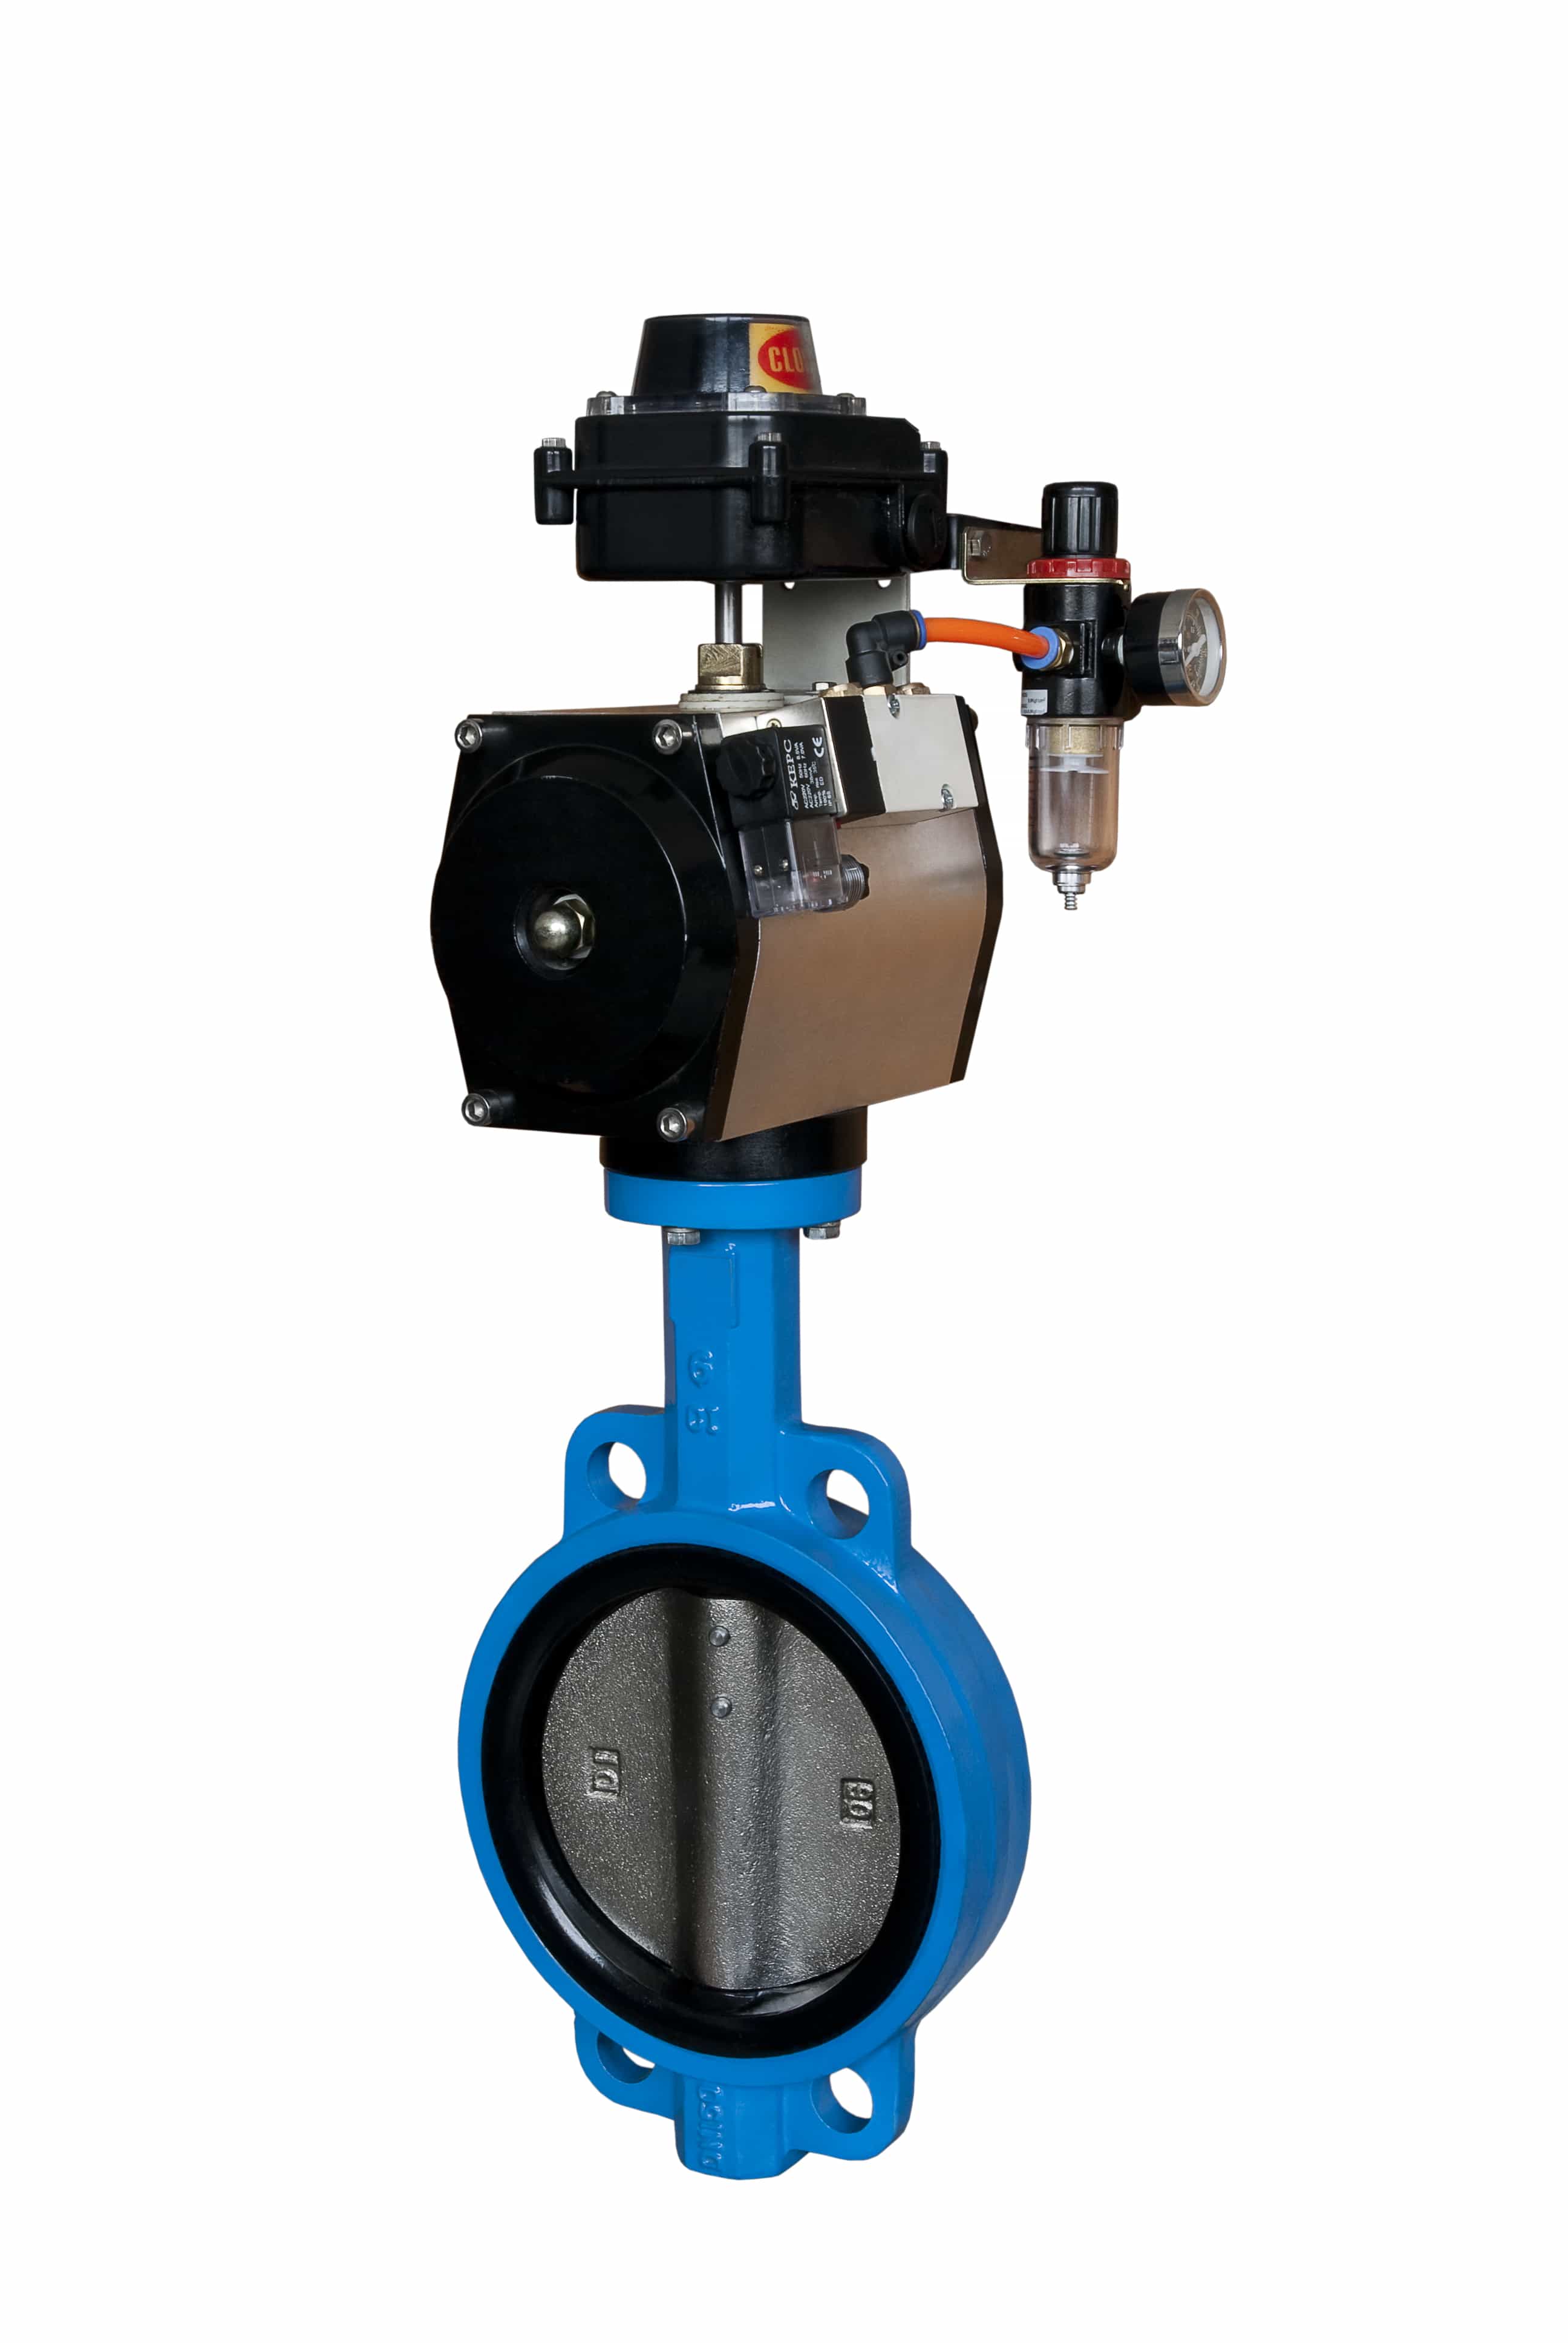 Advantages and maintenance of pneumatic butterfly valves